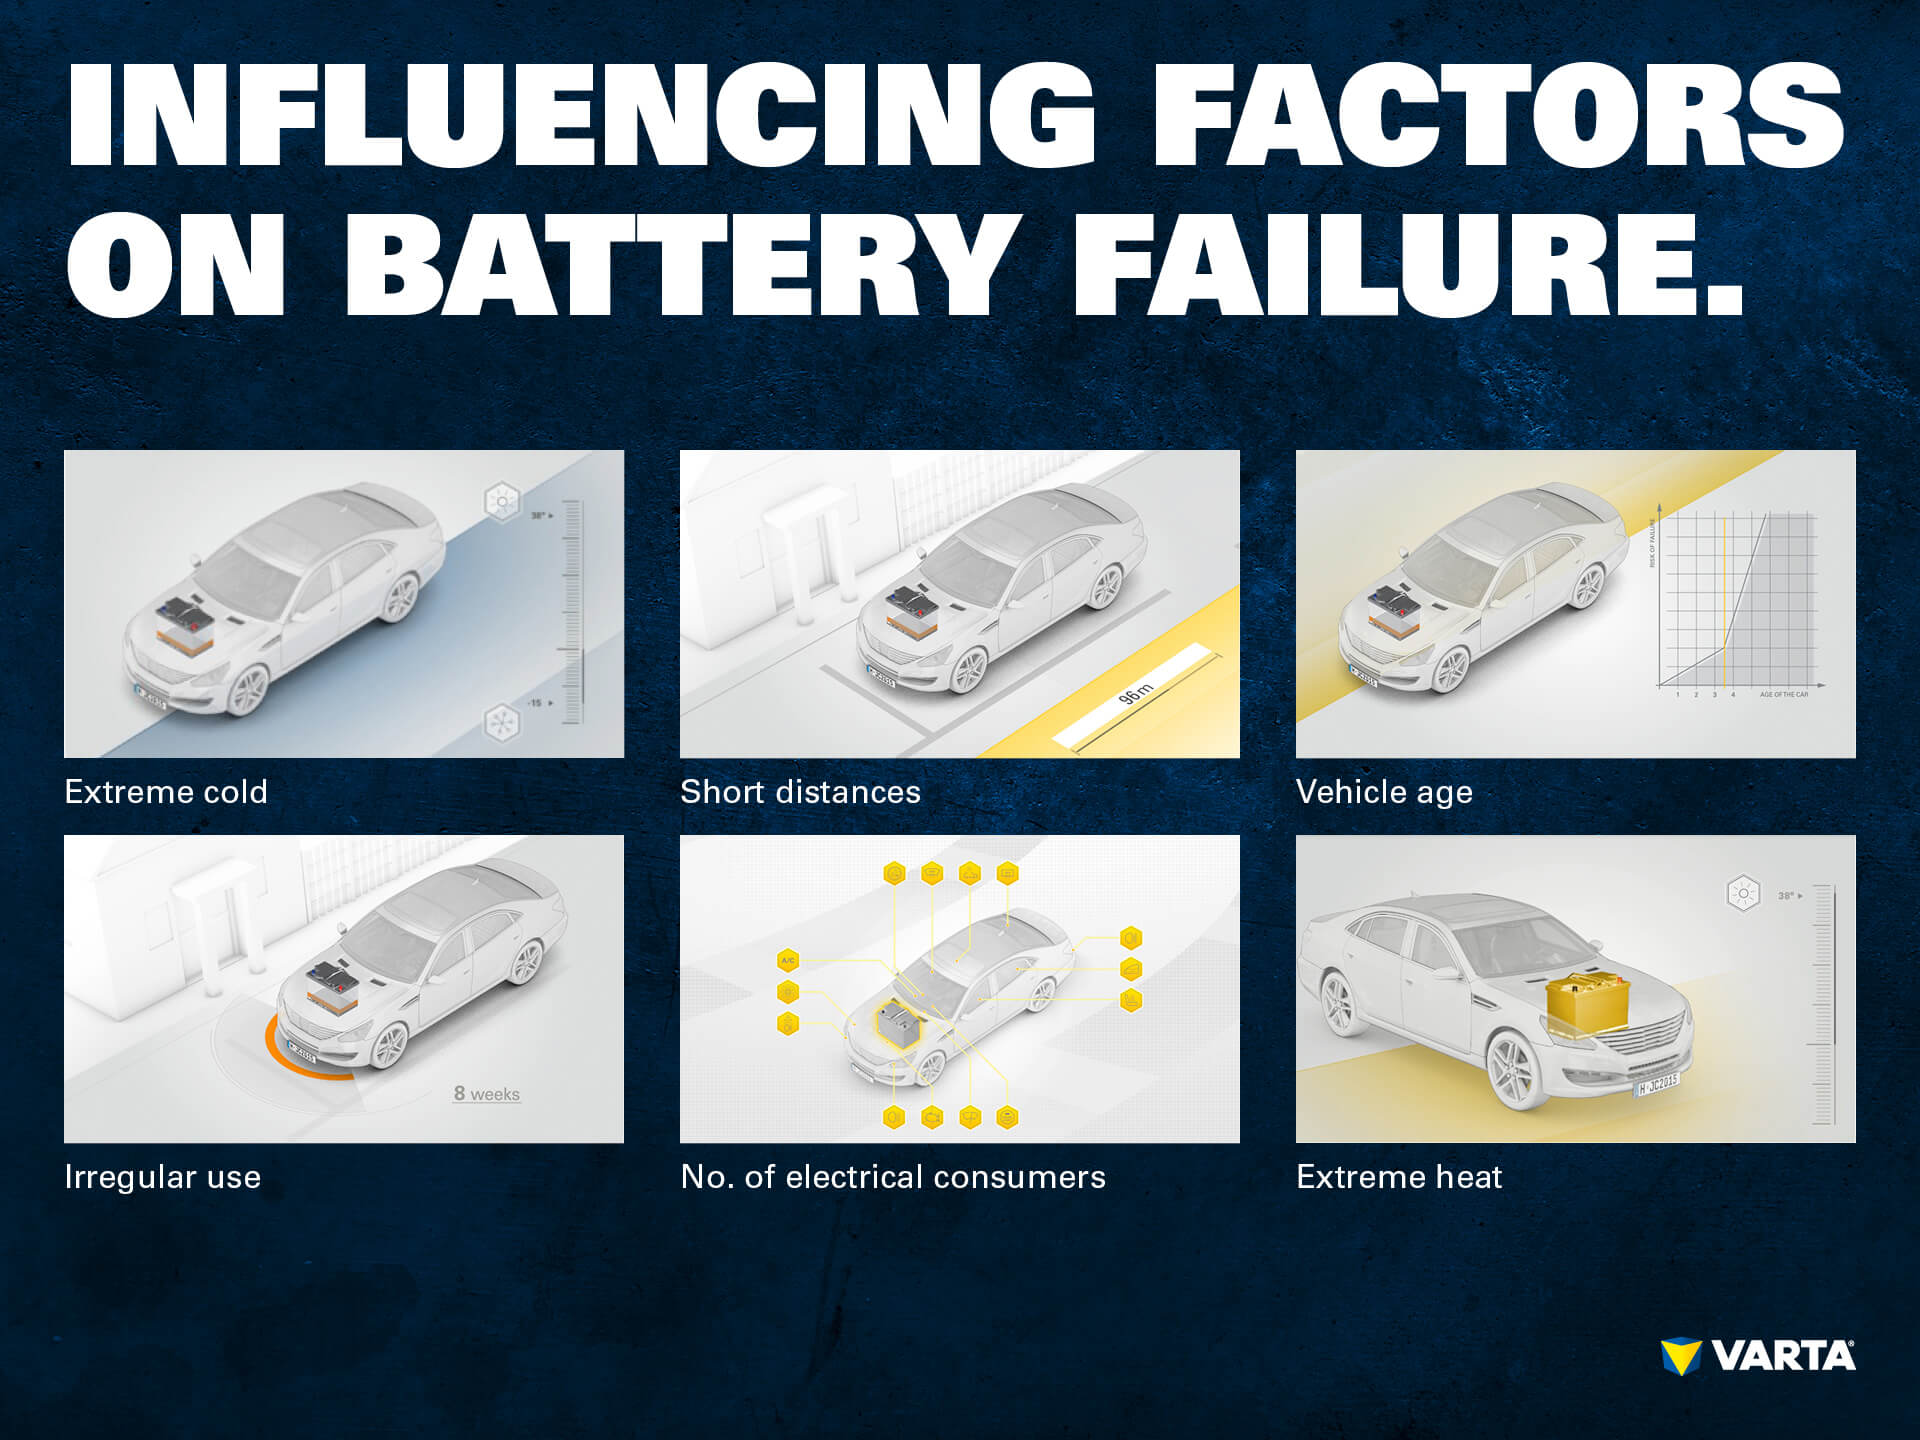 Influencing factors of battery failure